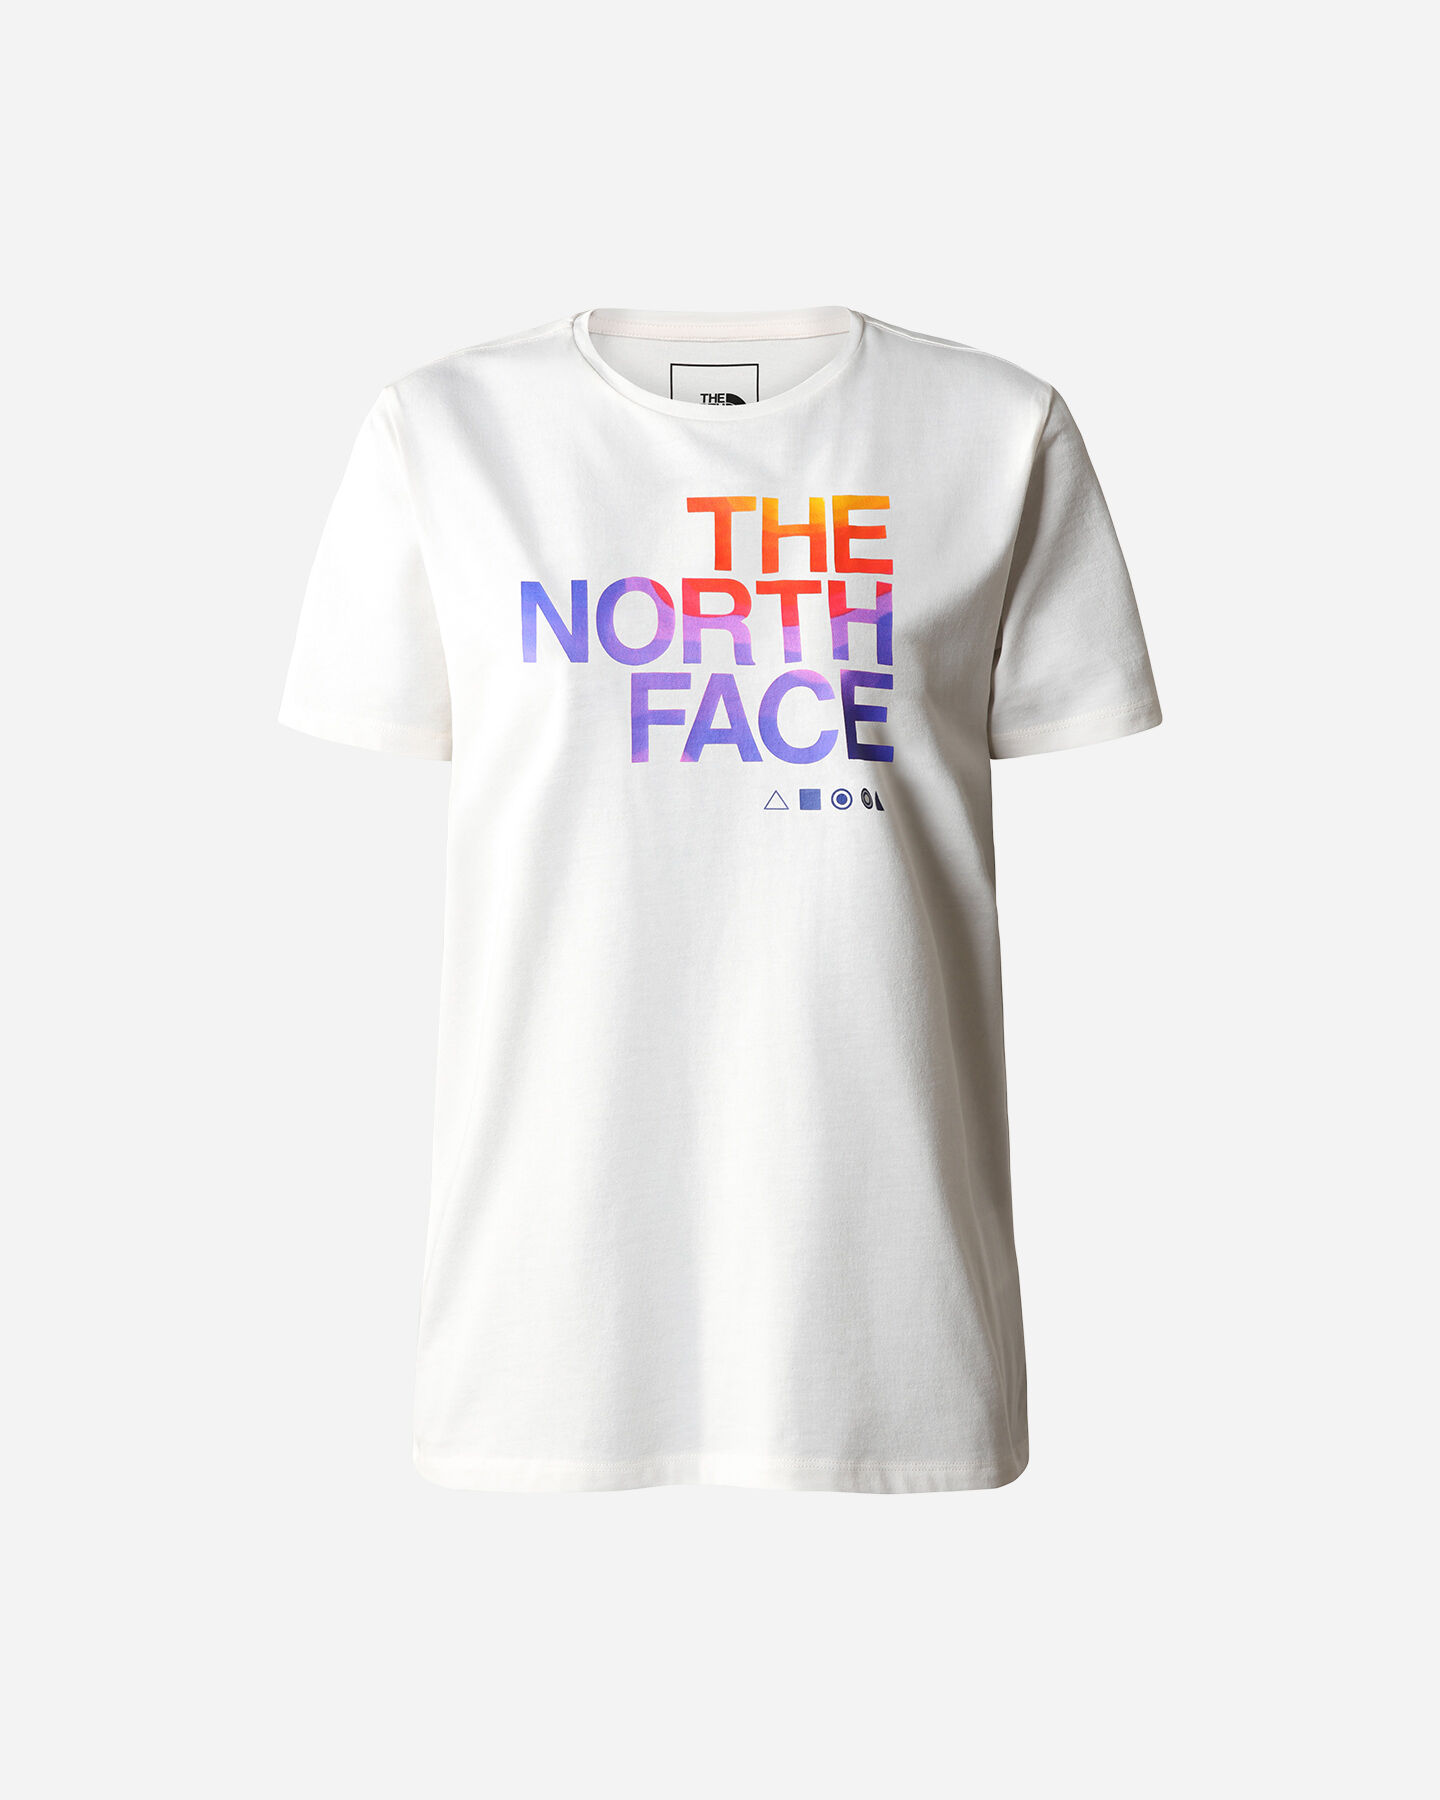  T-Shirt THE NORTH FACE FOUNDATION W S5536009|Q4C|XS scatto 0